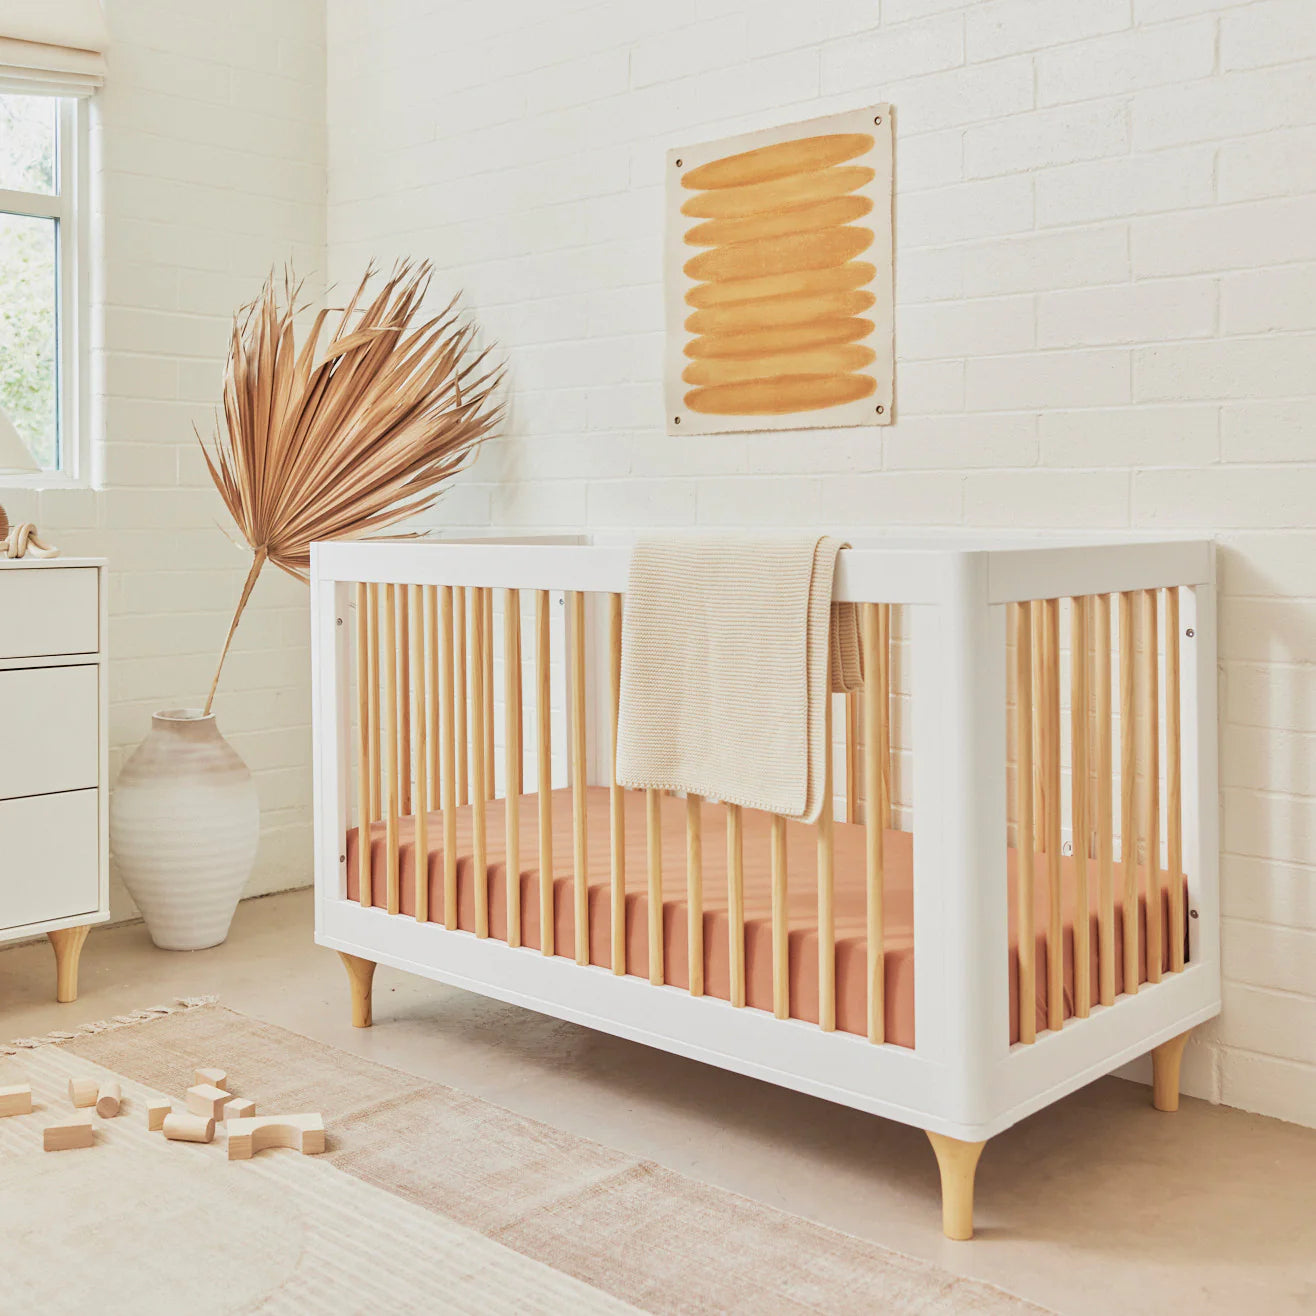 Babyletto Lolly 3-in-1 Convertible Crib - White / Natural Lifestyle